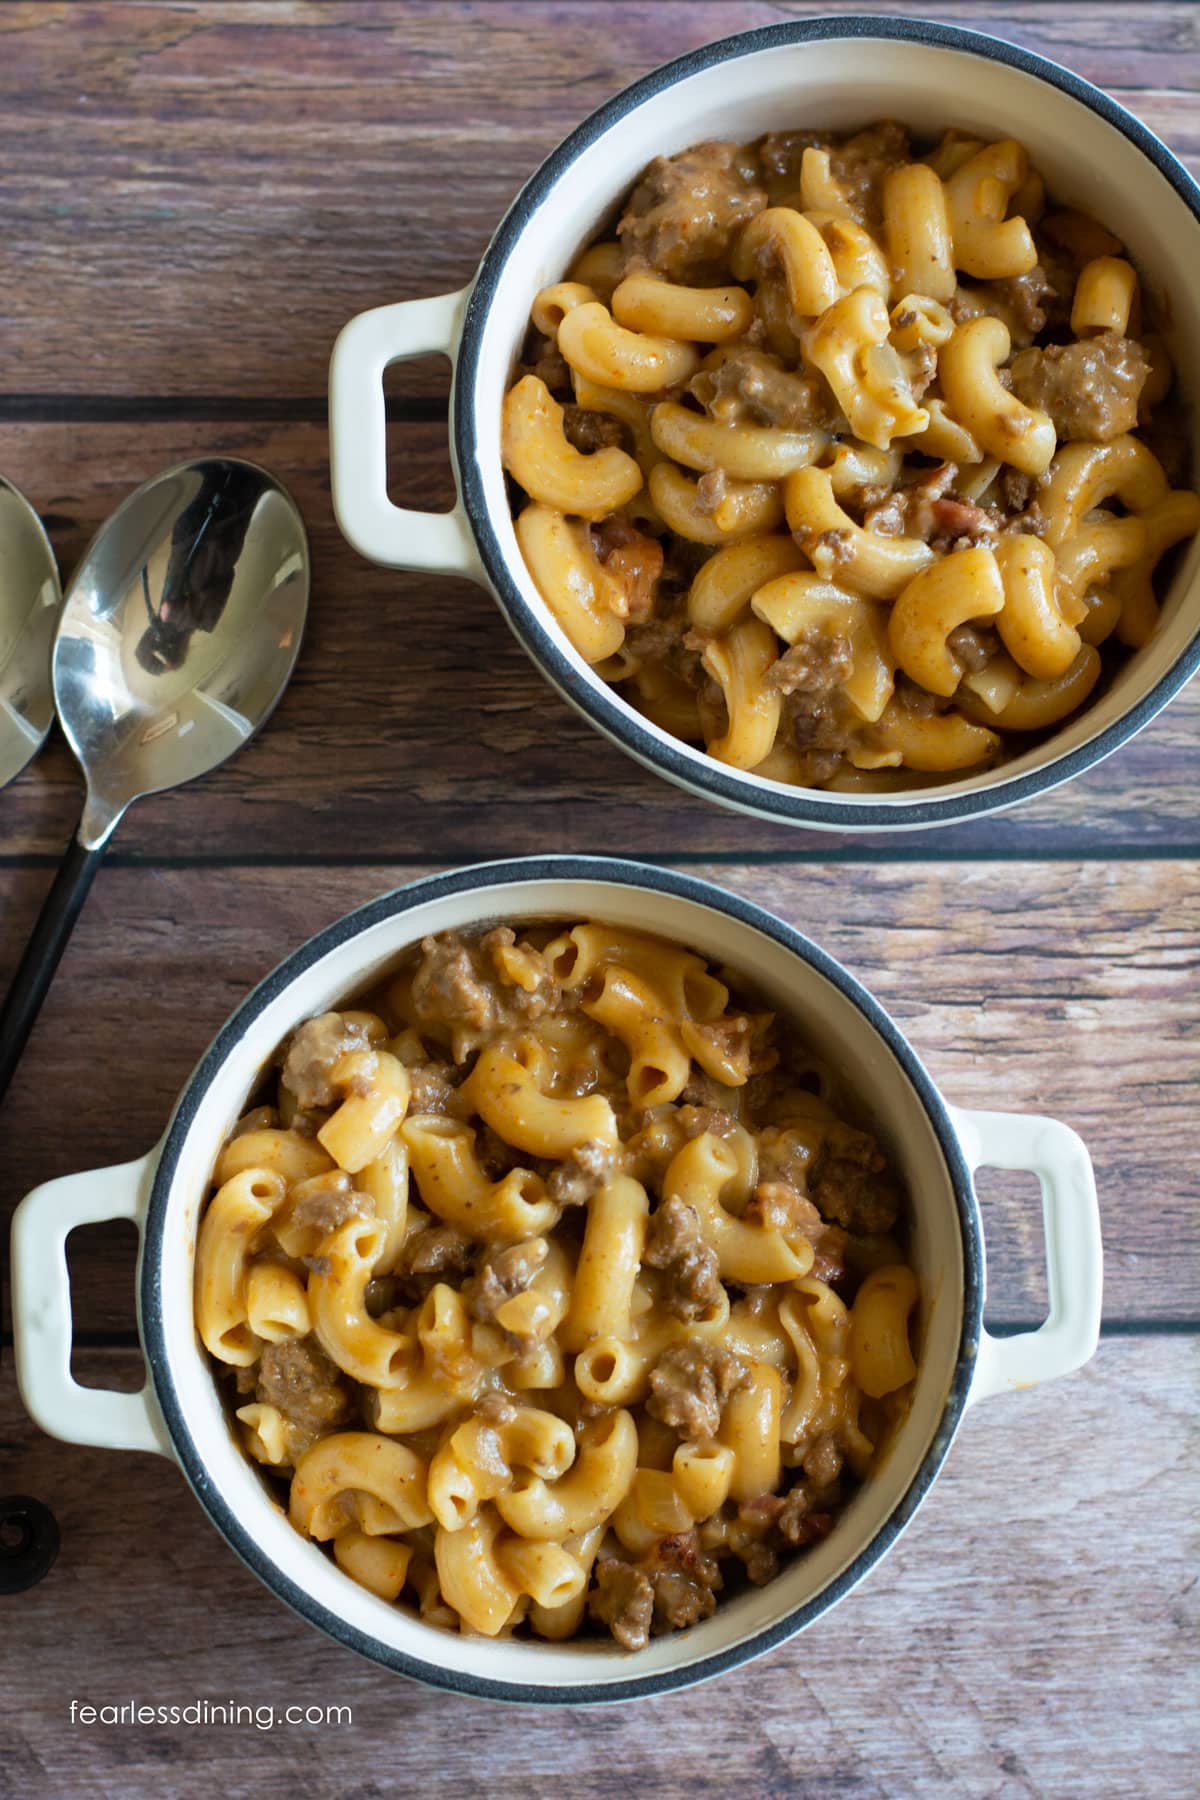 Two bowls of Gluten Free Hamburger Helper on a wooden table.